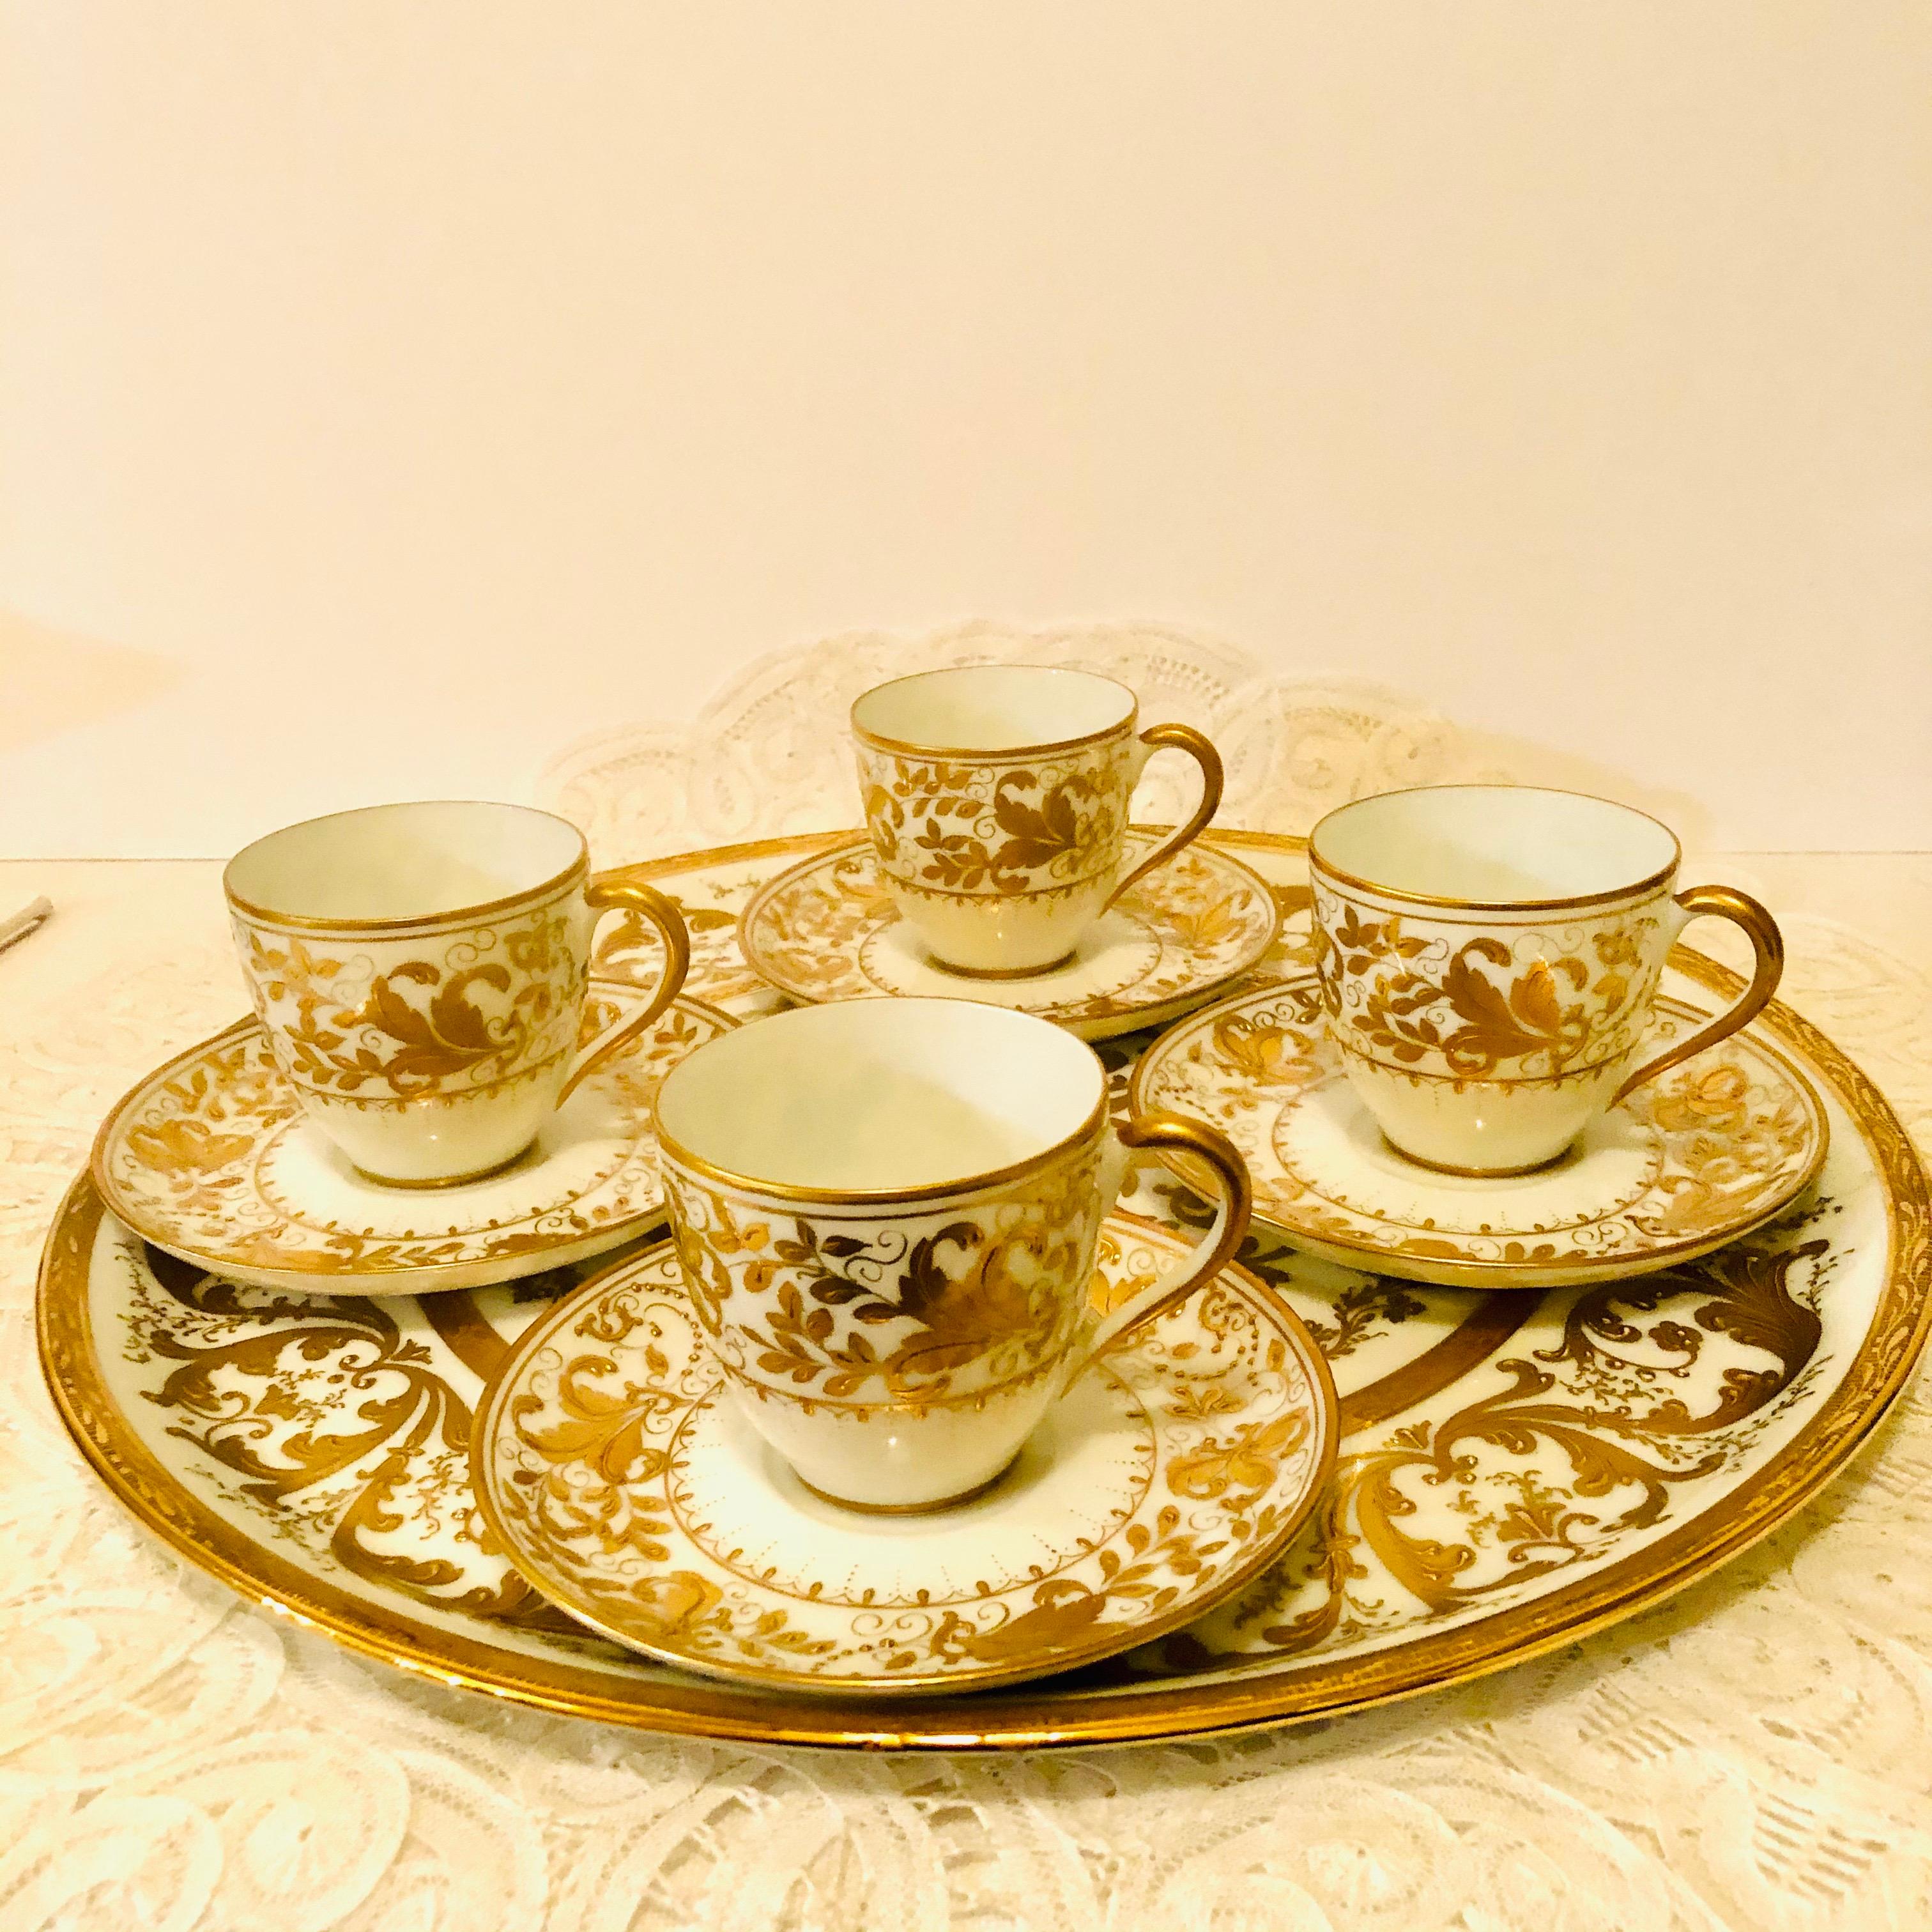 This is an exquisite Le Tallec set that includes four demitasse cups and saucers with a tray with a matching pattern. All the cups and saucers and the tray are embellished in raised profuse gilding with curves and scrolls in a rococo style. The tray